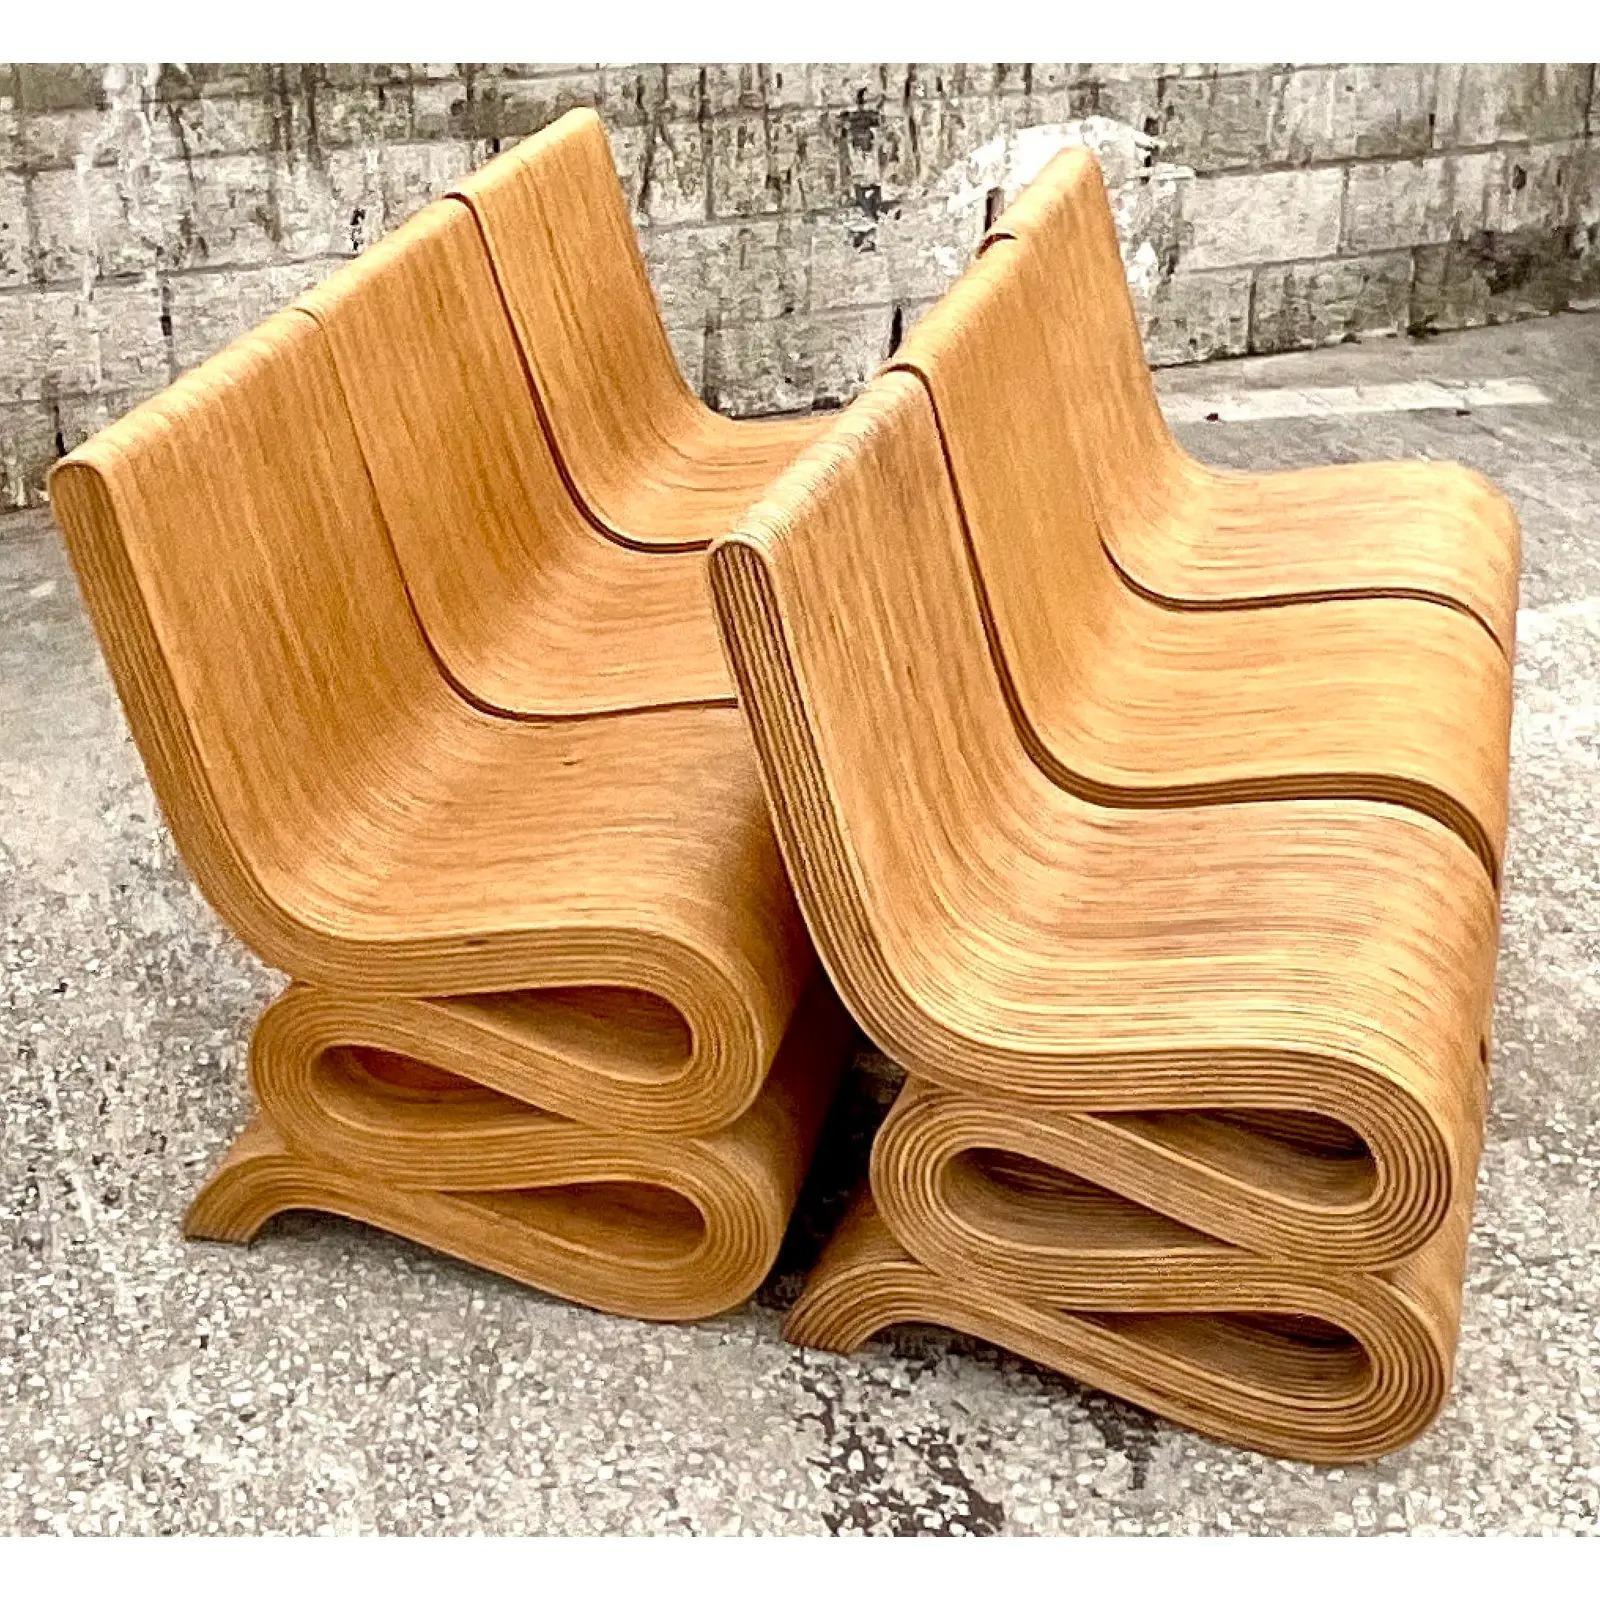 Fantastic set of Pencil Reed dining chairs. A classic Coastal homage to the iconic Gehry Wiggle chair.